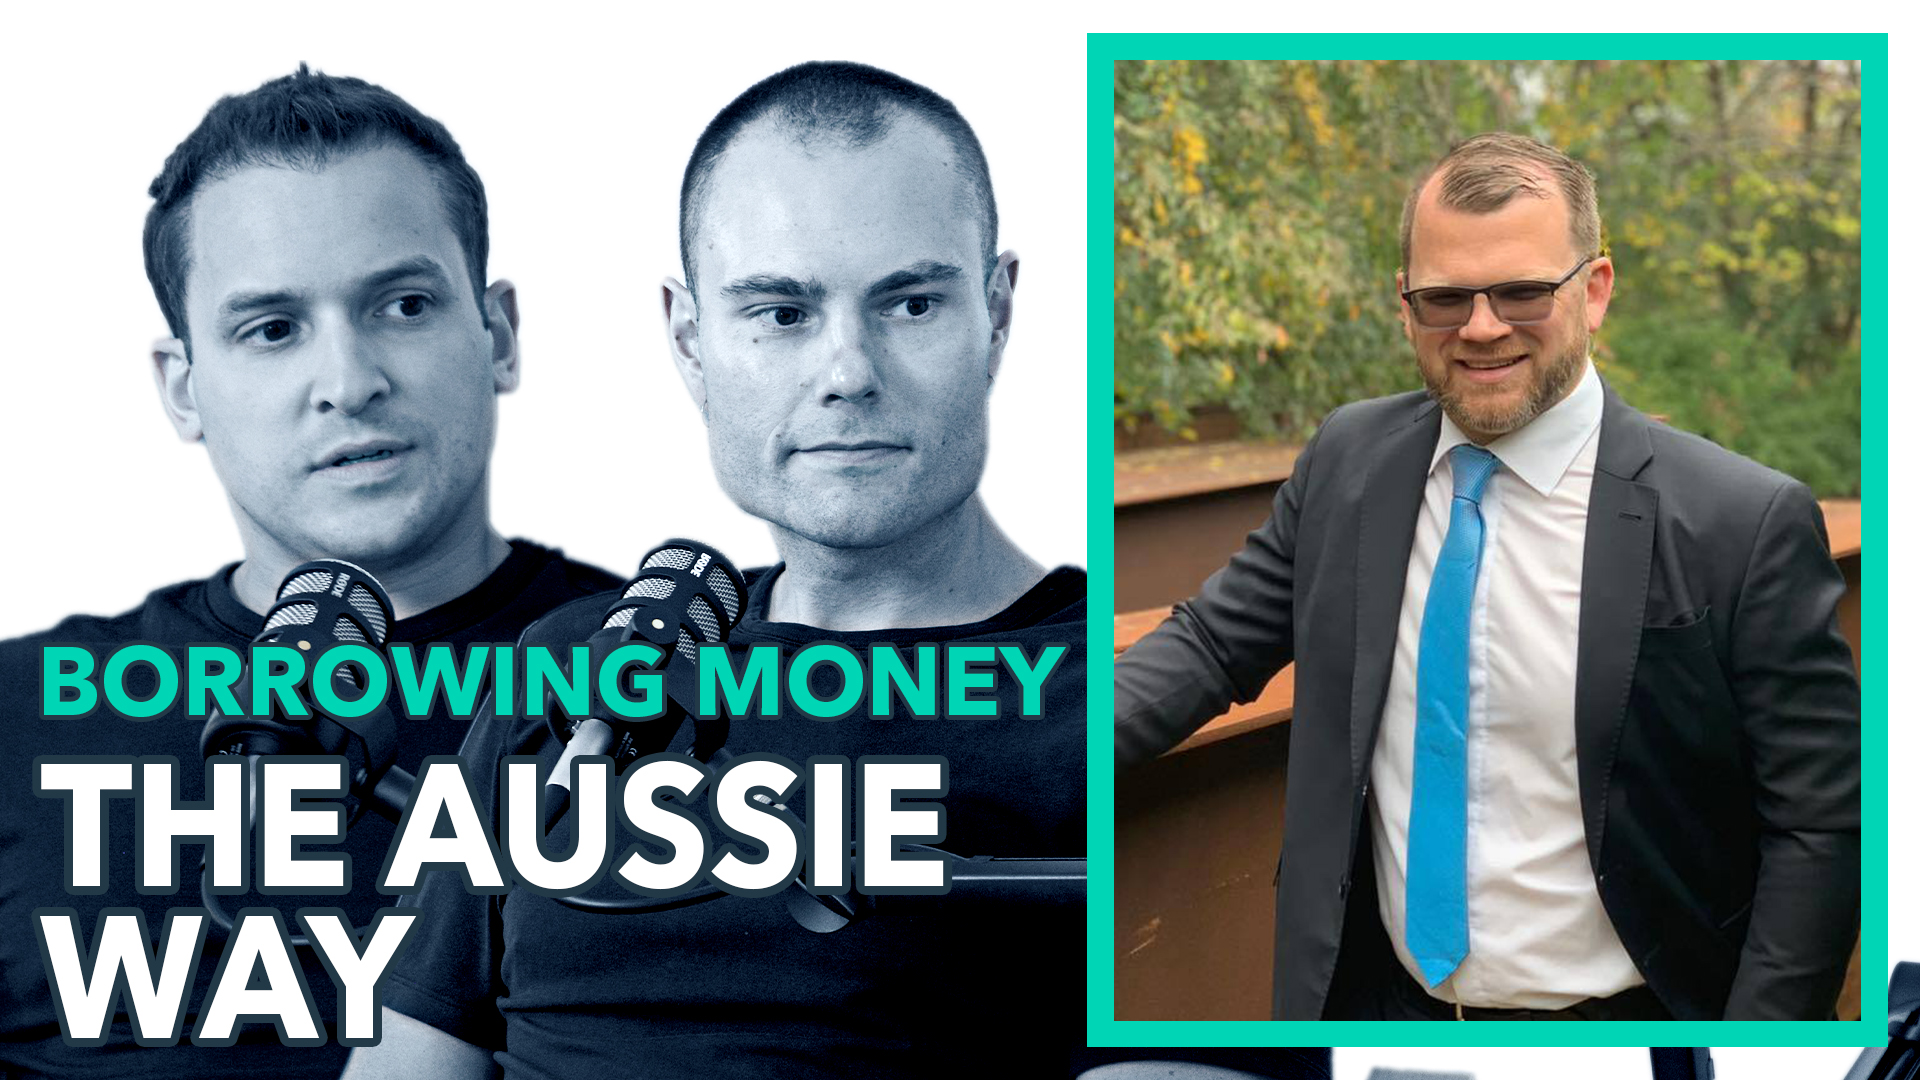 How Borrowing Money is Different for Australian Business Owners with Aaron Whybrow